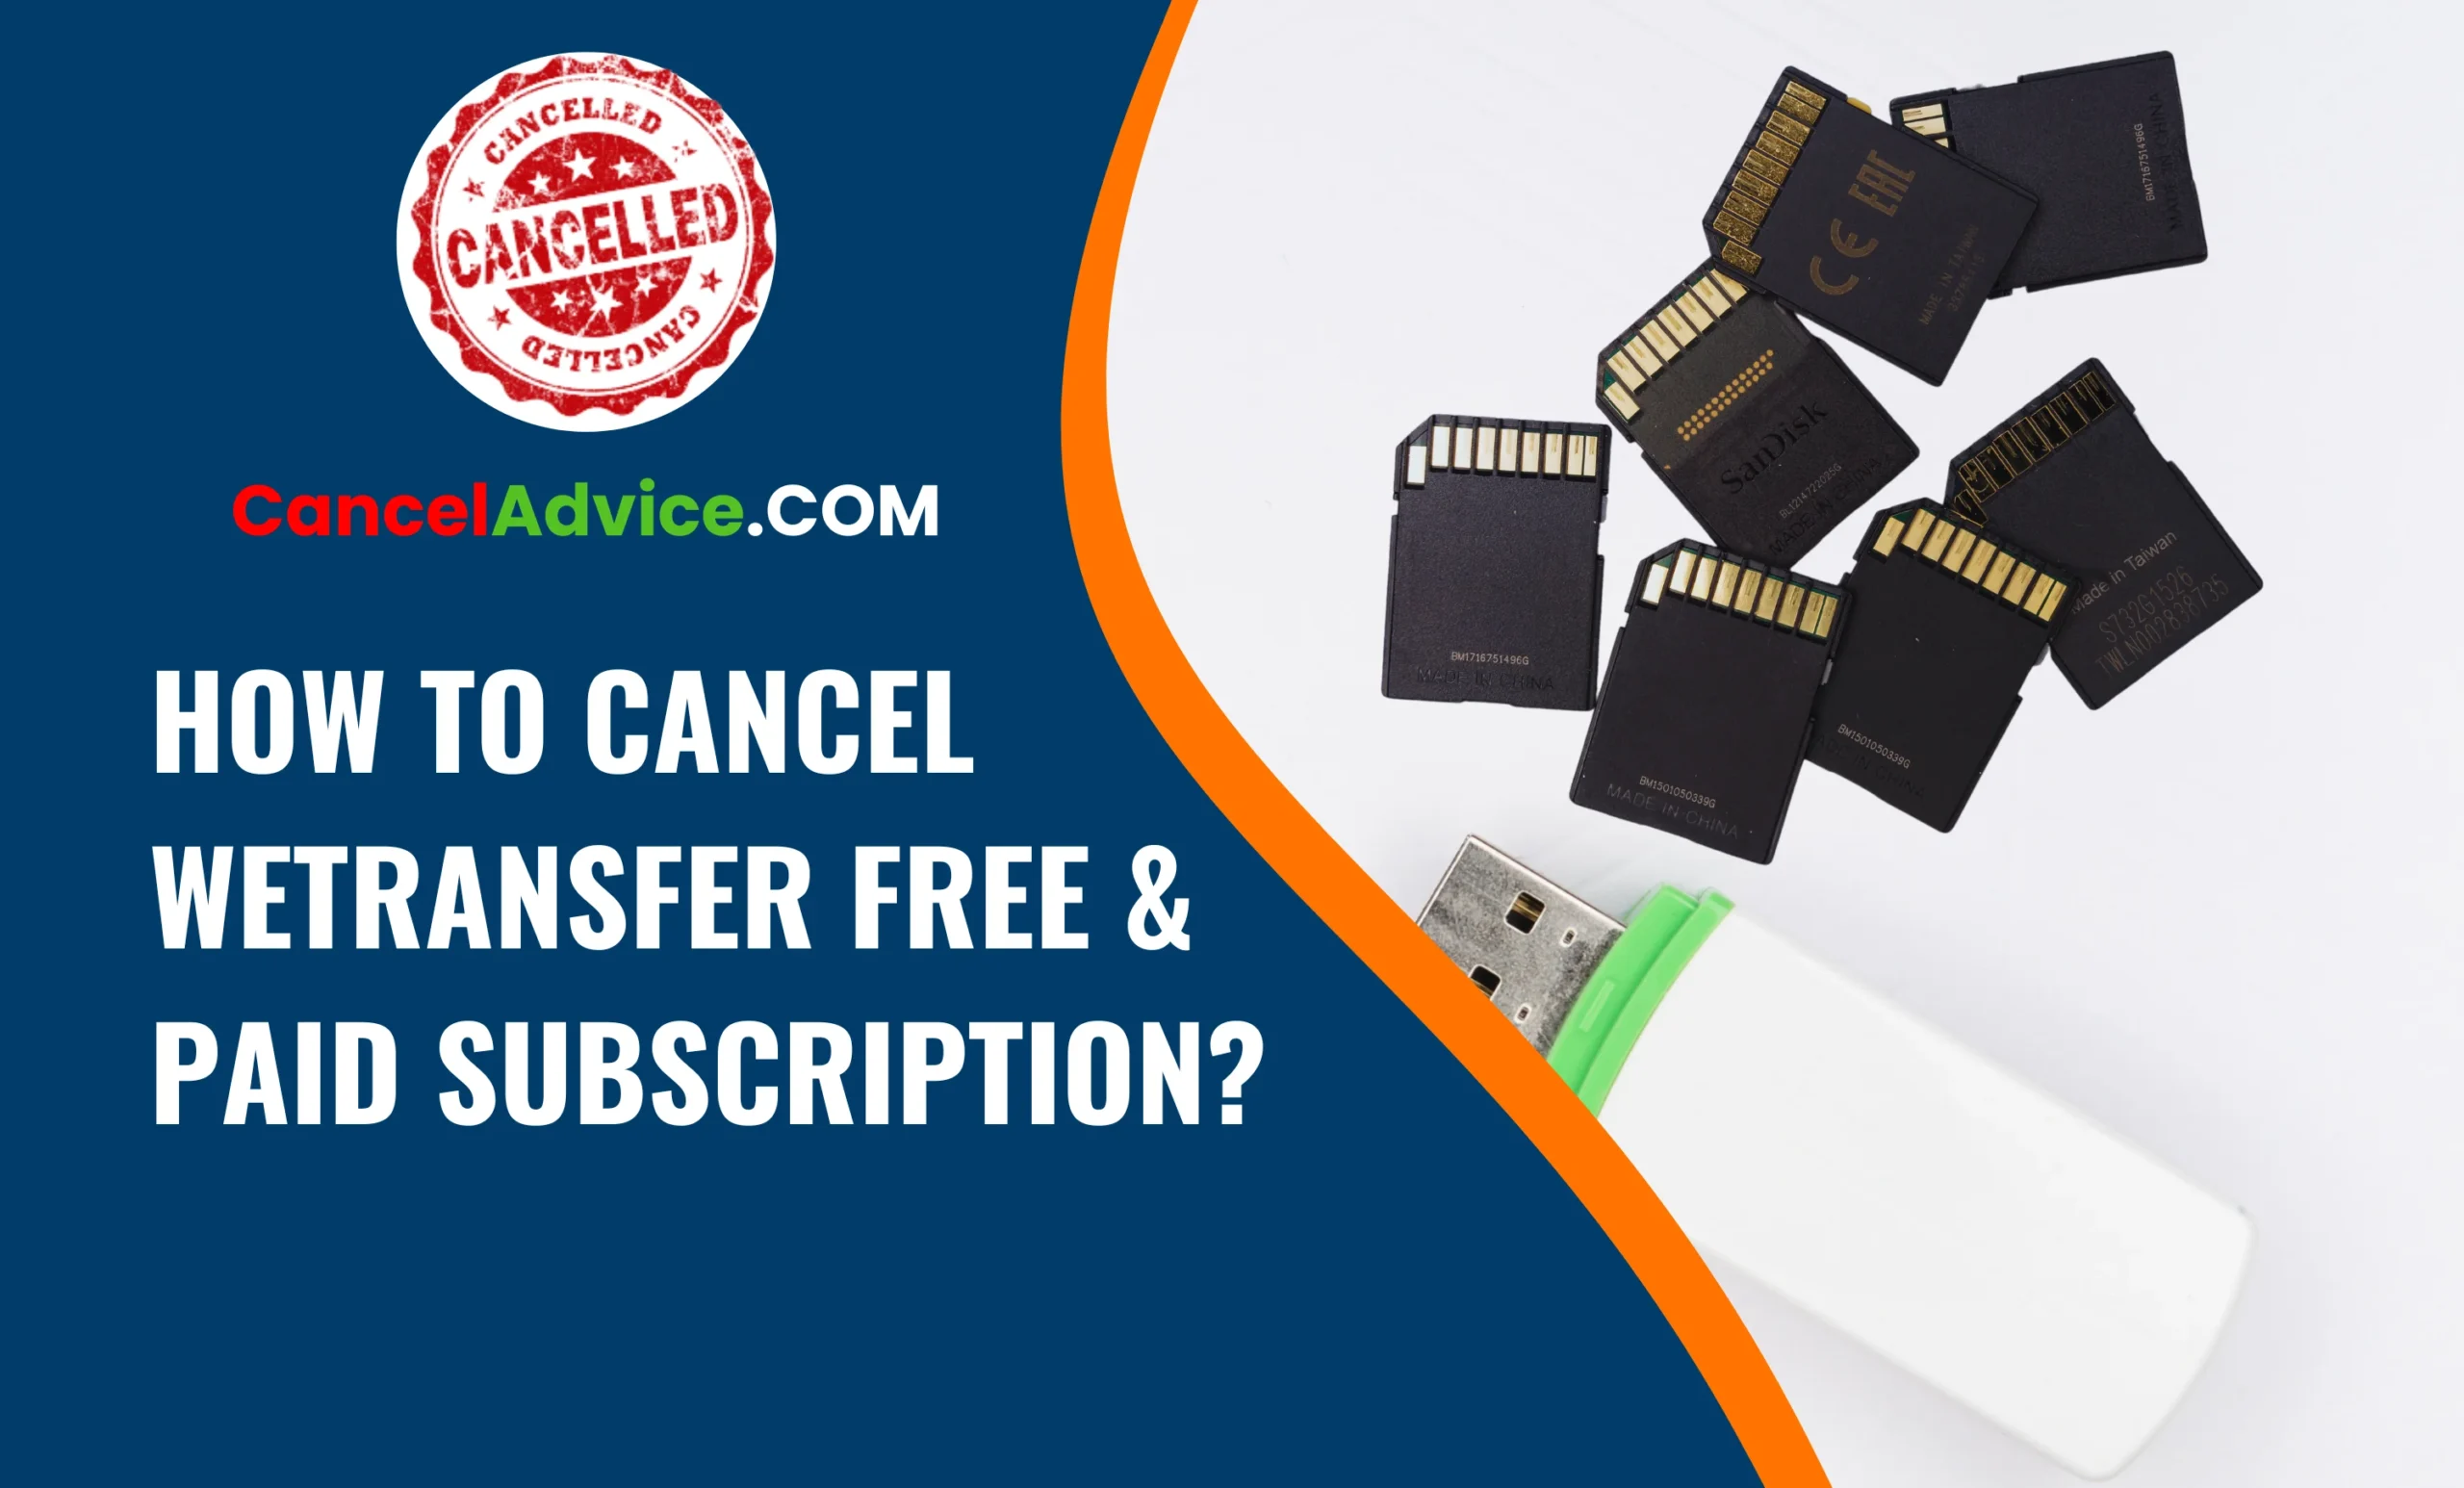 How To Cancel WeTransfer Free & Paid Subscription